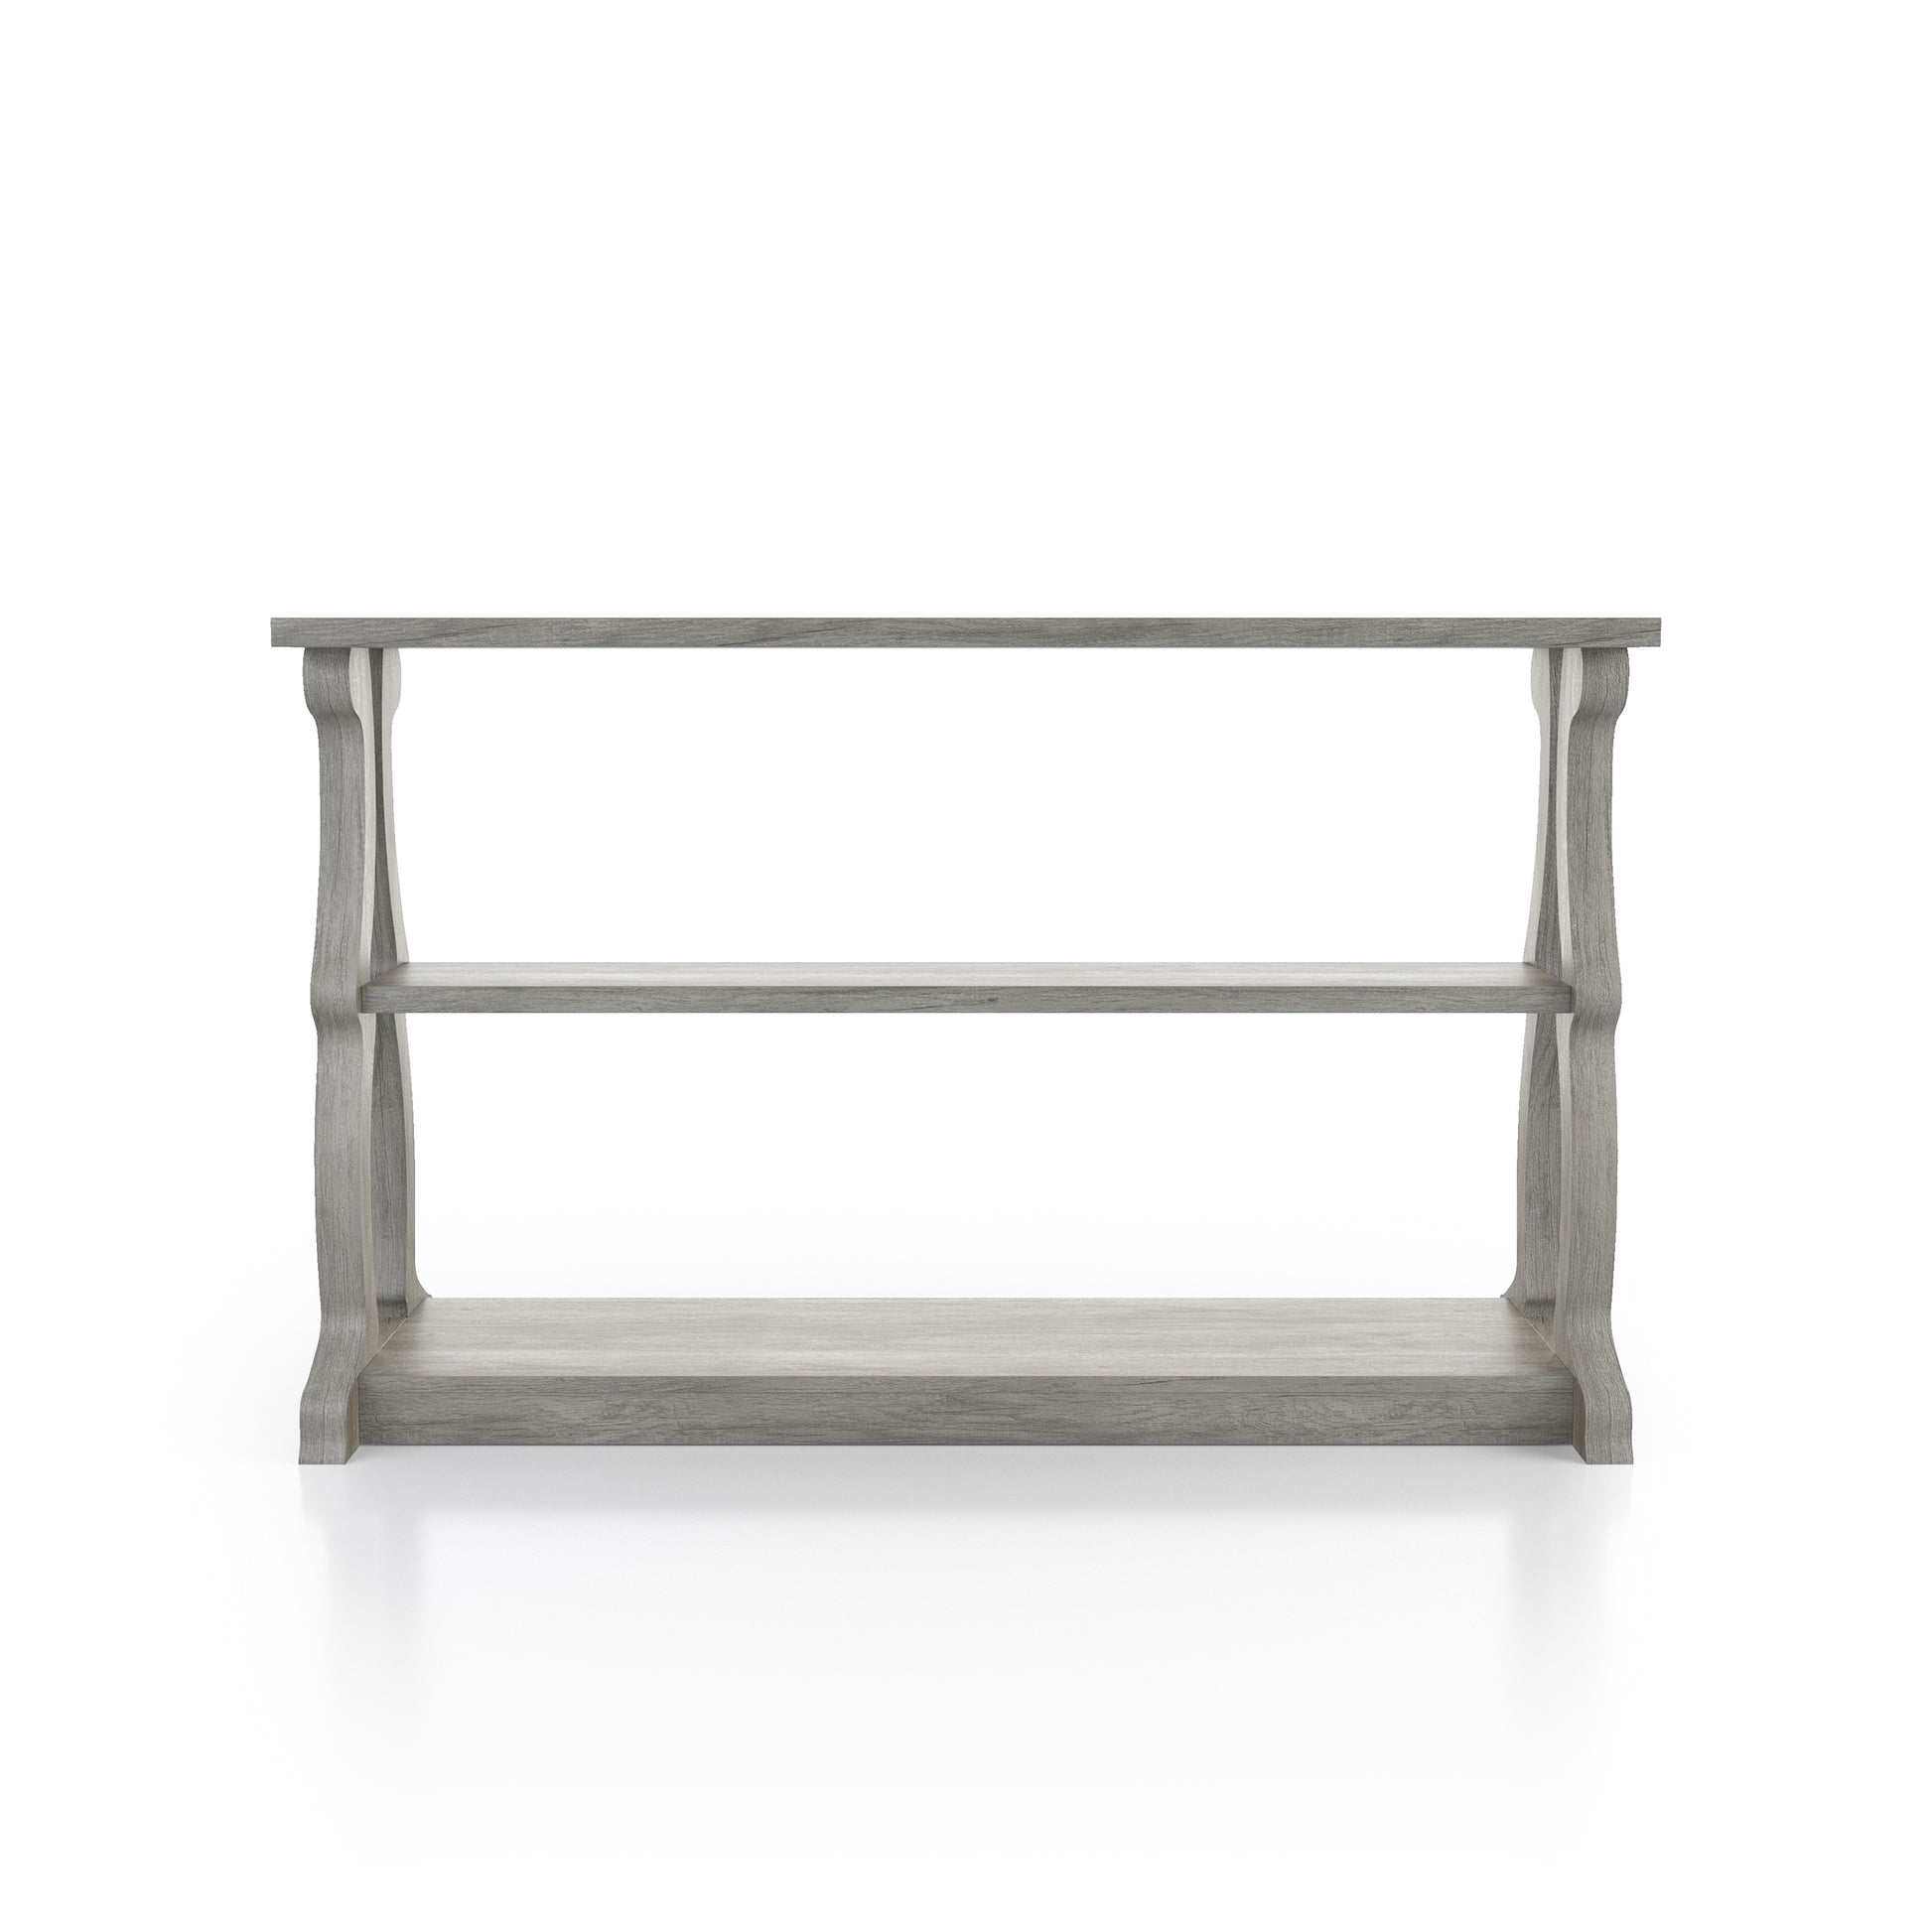 Front-facing farmhouse vintage gray oak sofa table with scroll legs on a white background